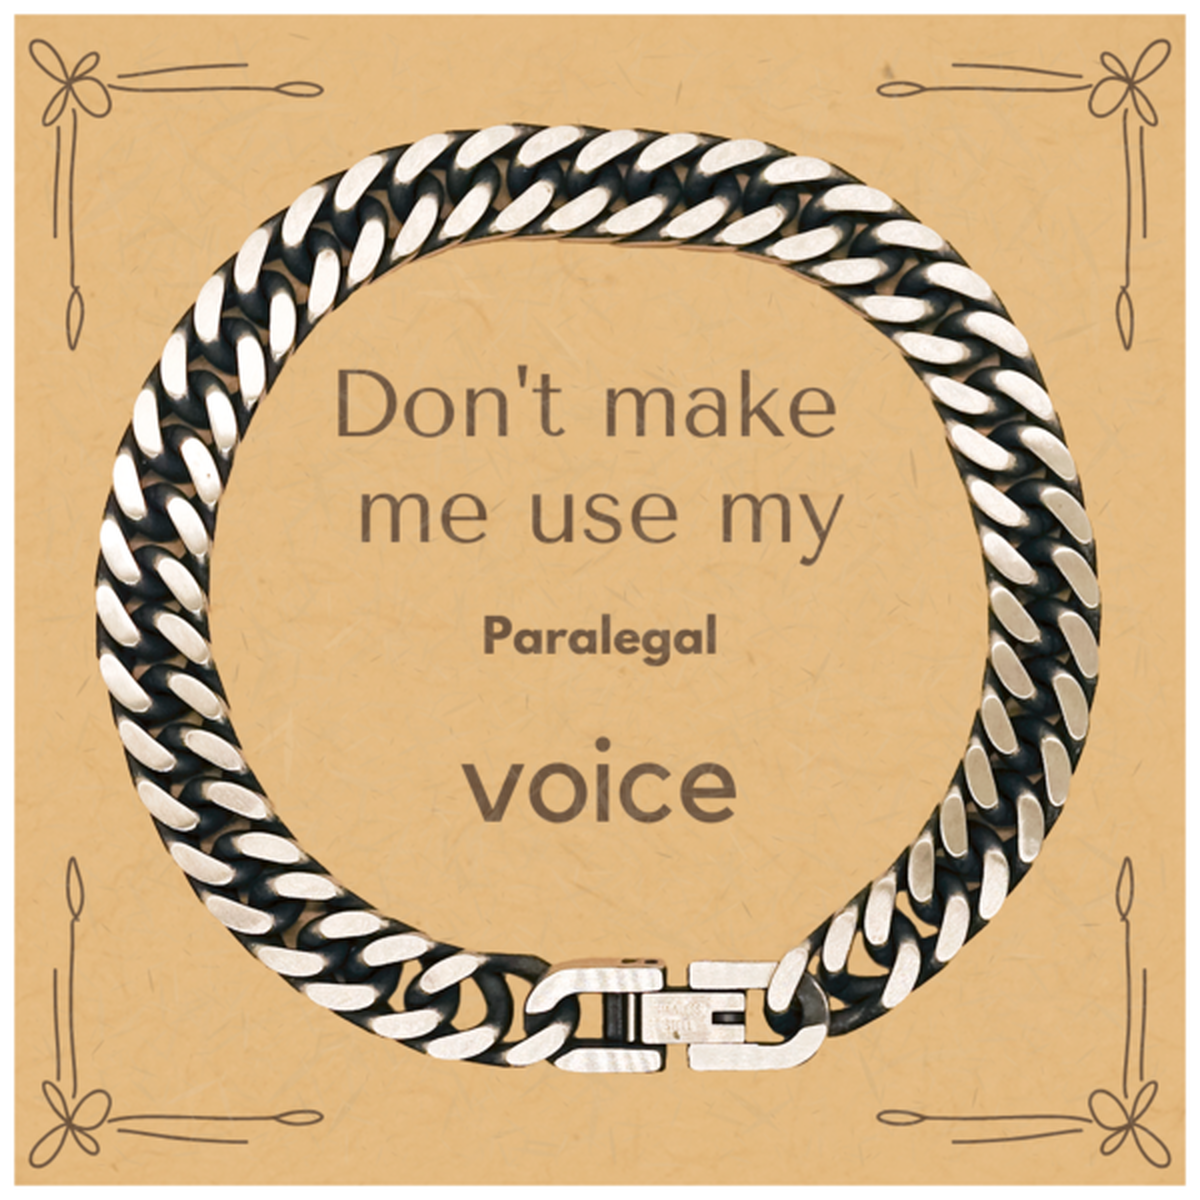 Don't make me use my Paralegal voice, Sarcasm Paralegal Card Gifts, Christmas Paralegal Cuban Link Chain Bracelet Birthday Unique Gifts For Paralegal Coworkers, Men, Women, Colleague, Friends